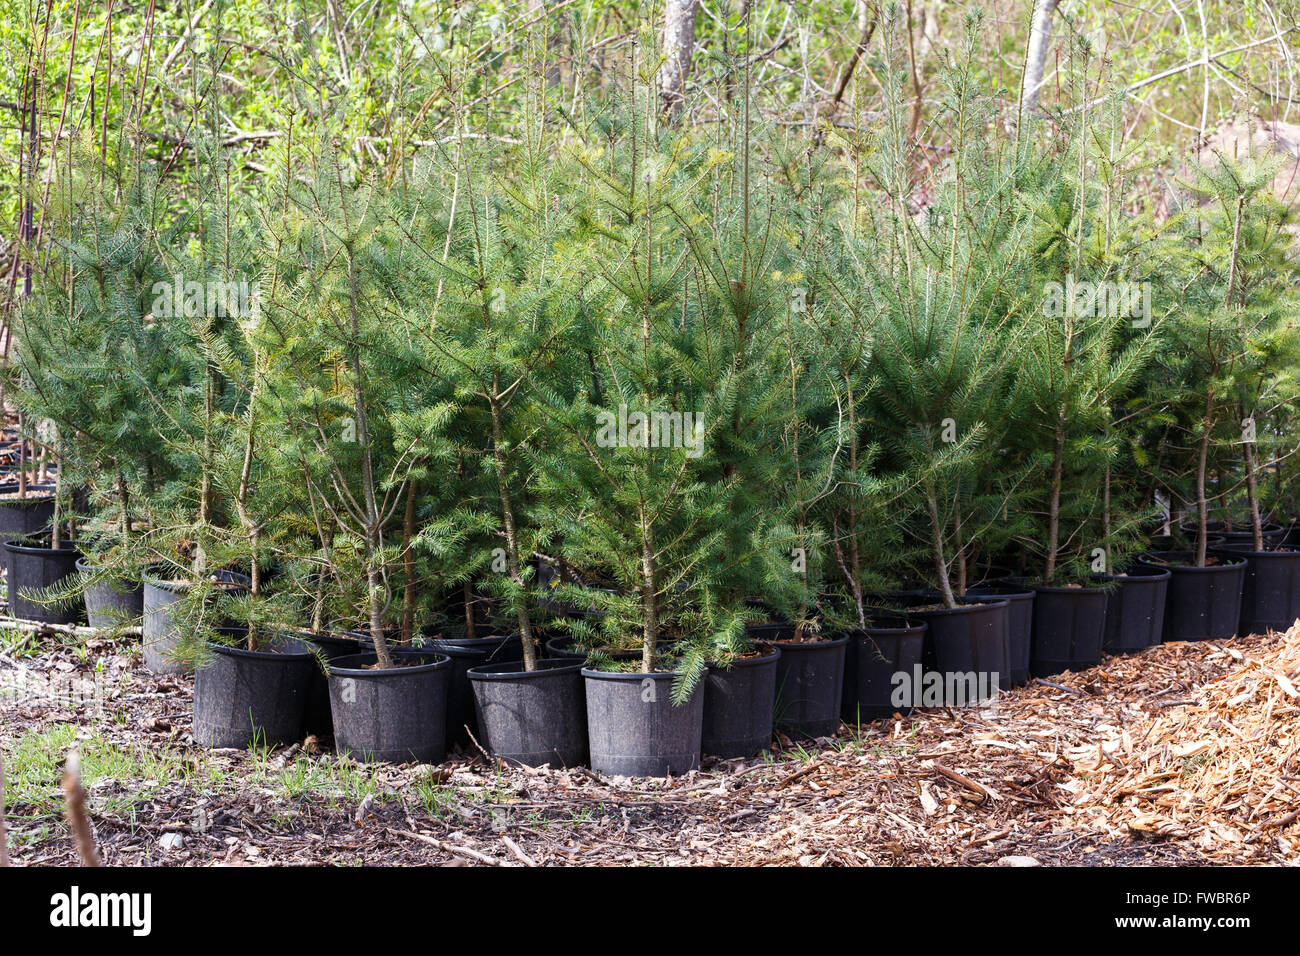 young pine tree in plastic pots on tree farm Stock Photo